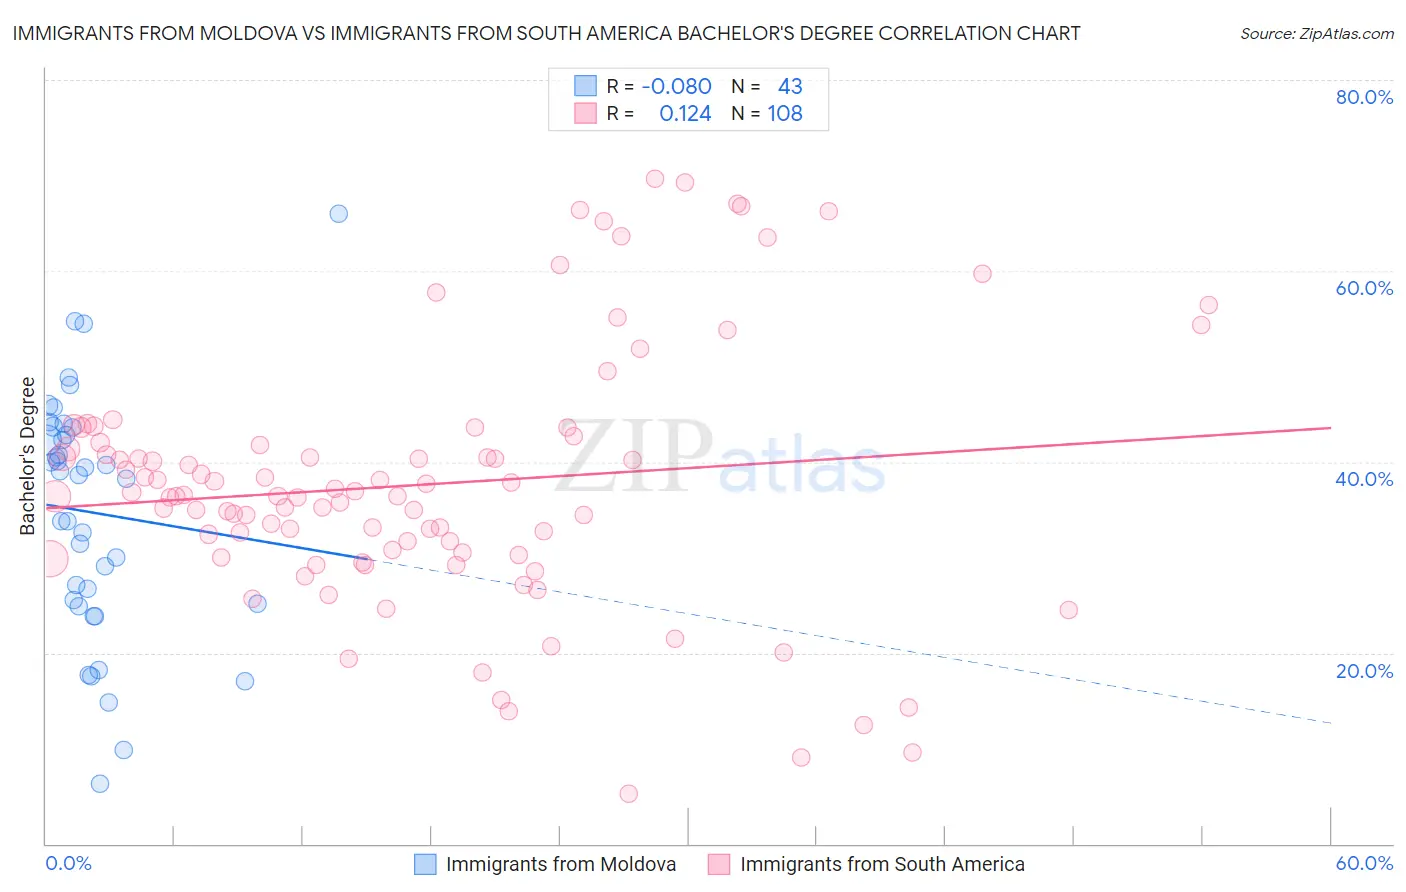 Immigrants from Moldova vs Immigrants from South America Bachelor's Degree